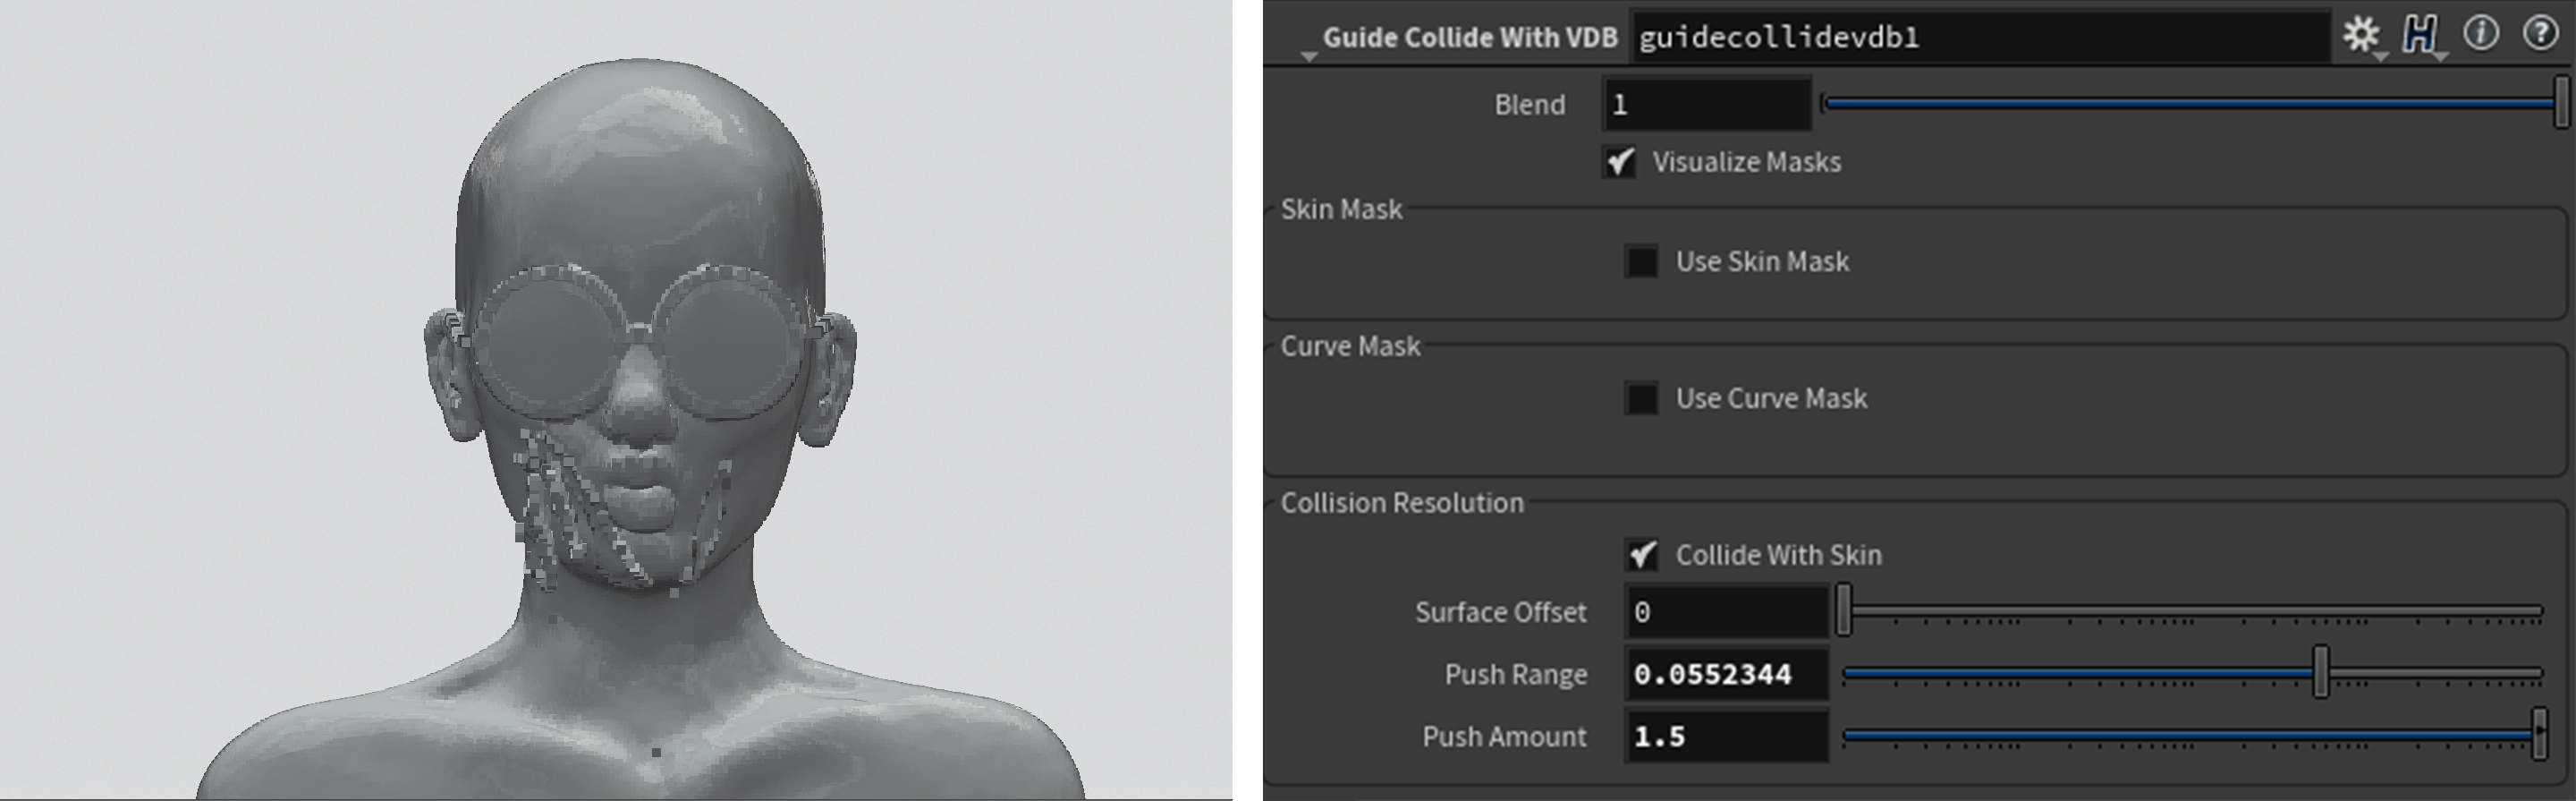 Groom hair physics makes hair weird and stretchy - Rendering